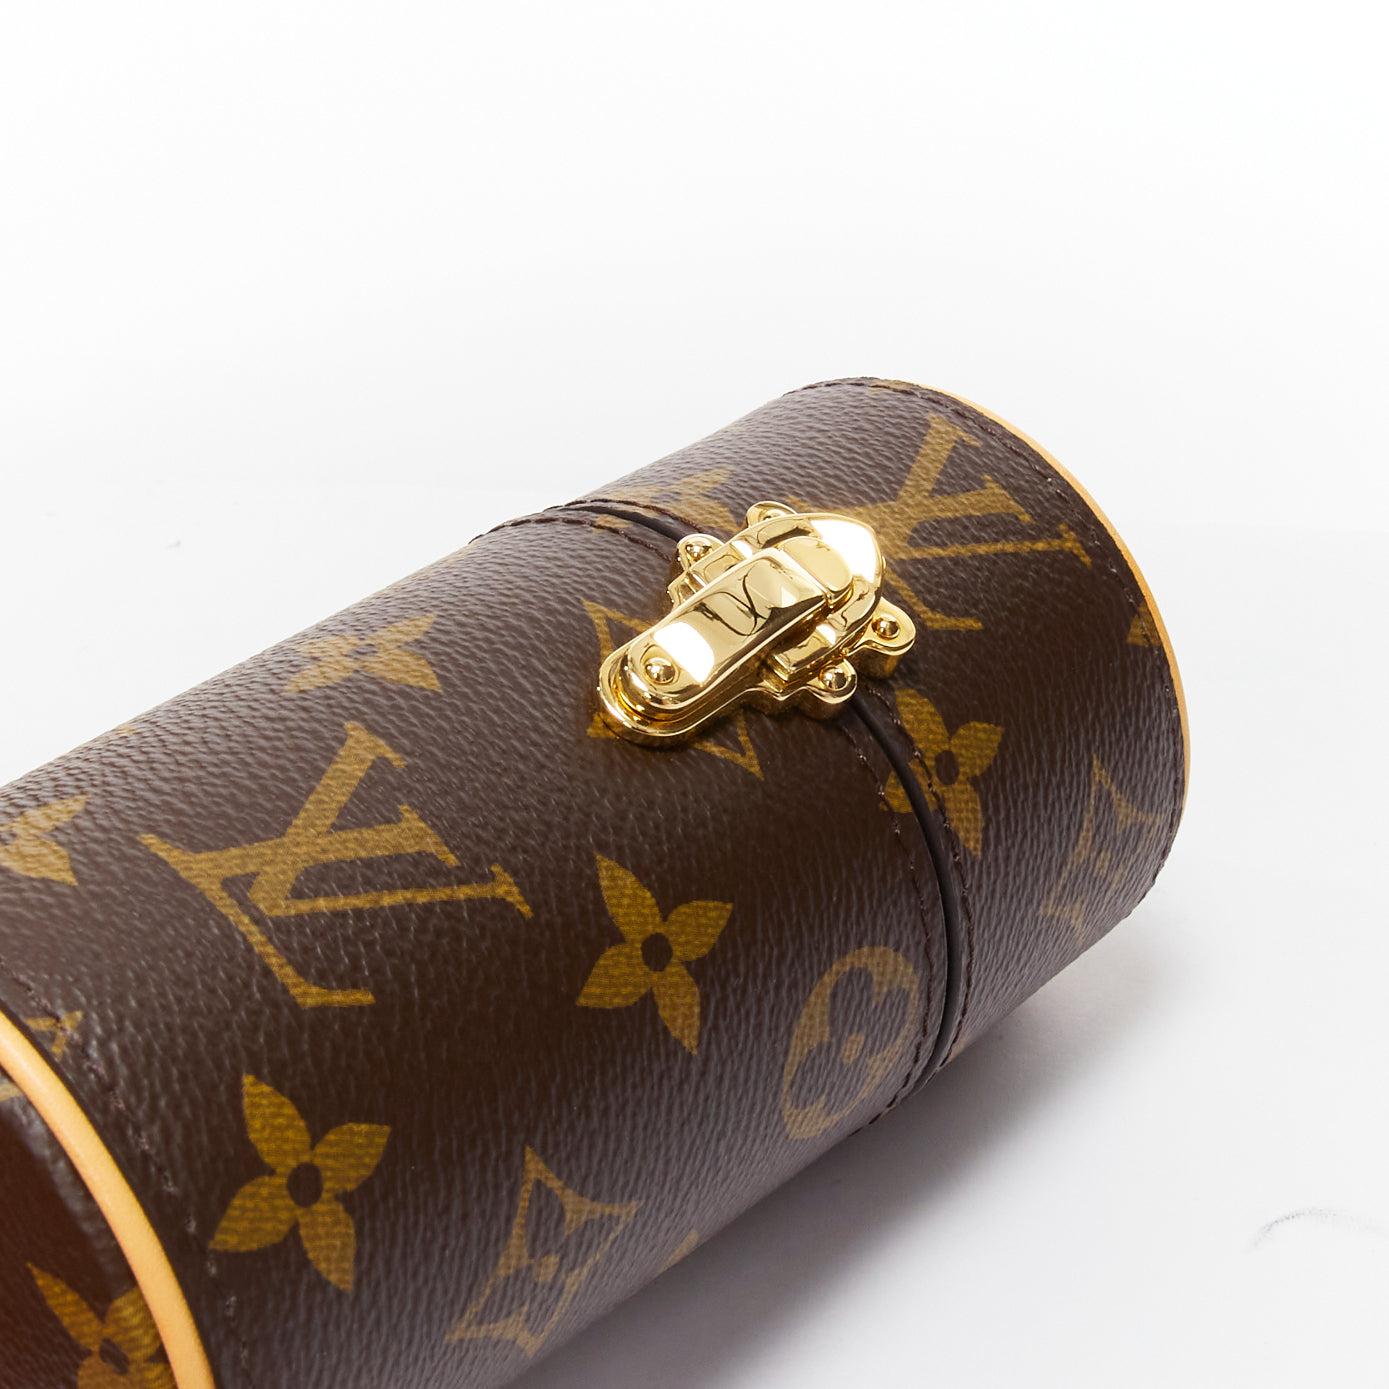 LOUIS VUITTON 100ml Perfume Travel Case brown LV logo canvas
Reference: TGAS/D00628
Brand: Louis Vuitton
Model: 100ml Perfume Case
Material: Canvas, Leather
Color: Brown
Pattern: Monogram
Closure: Clasp
Lining: Nude Leather
Extra Details: This is a